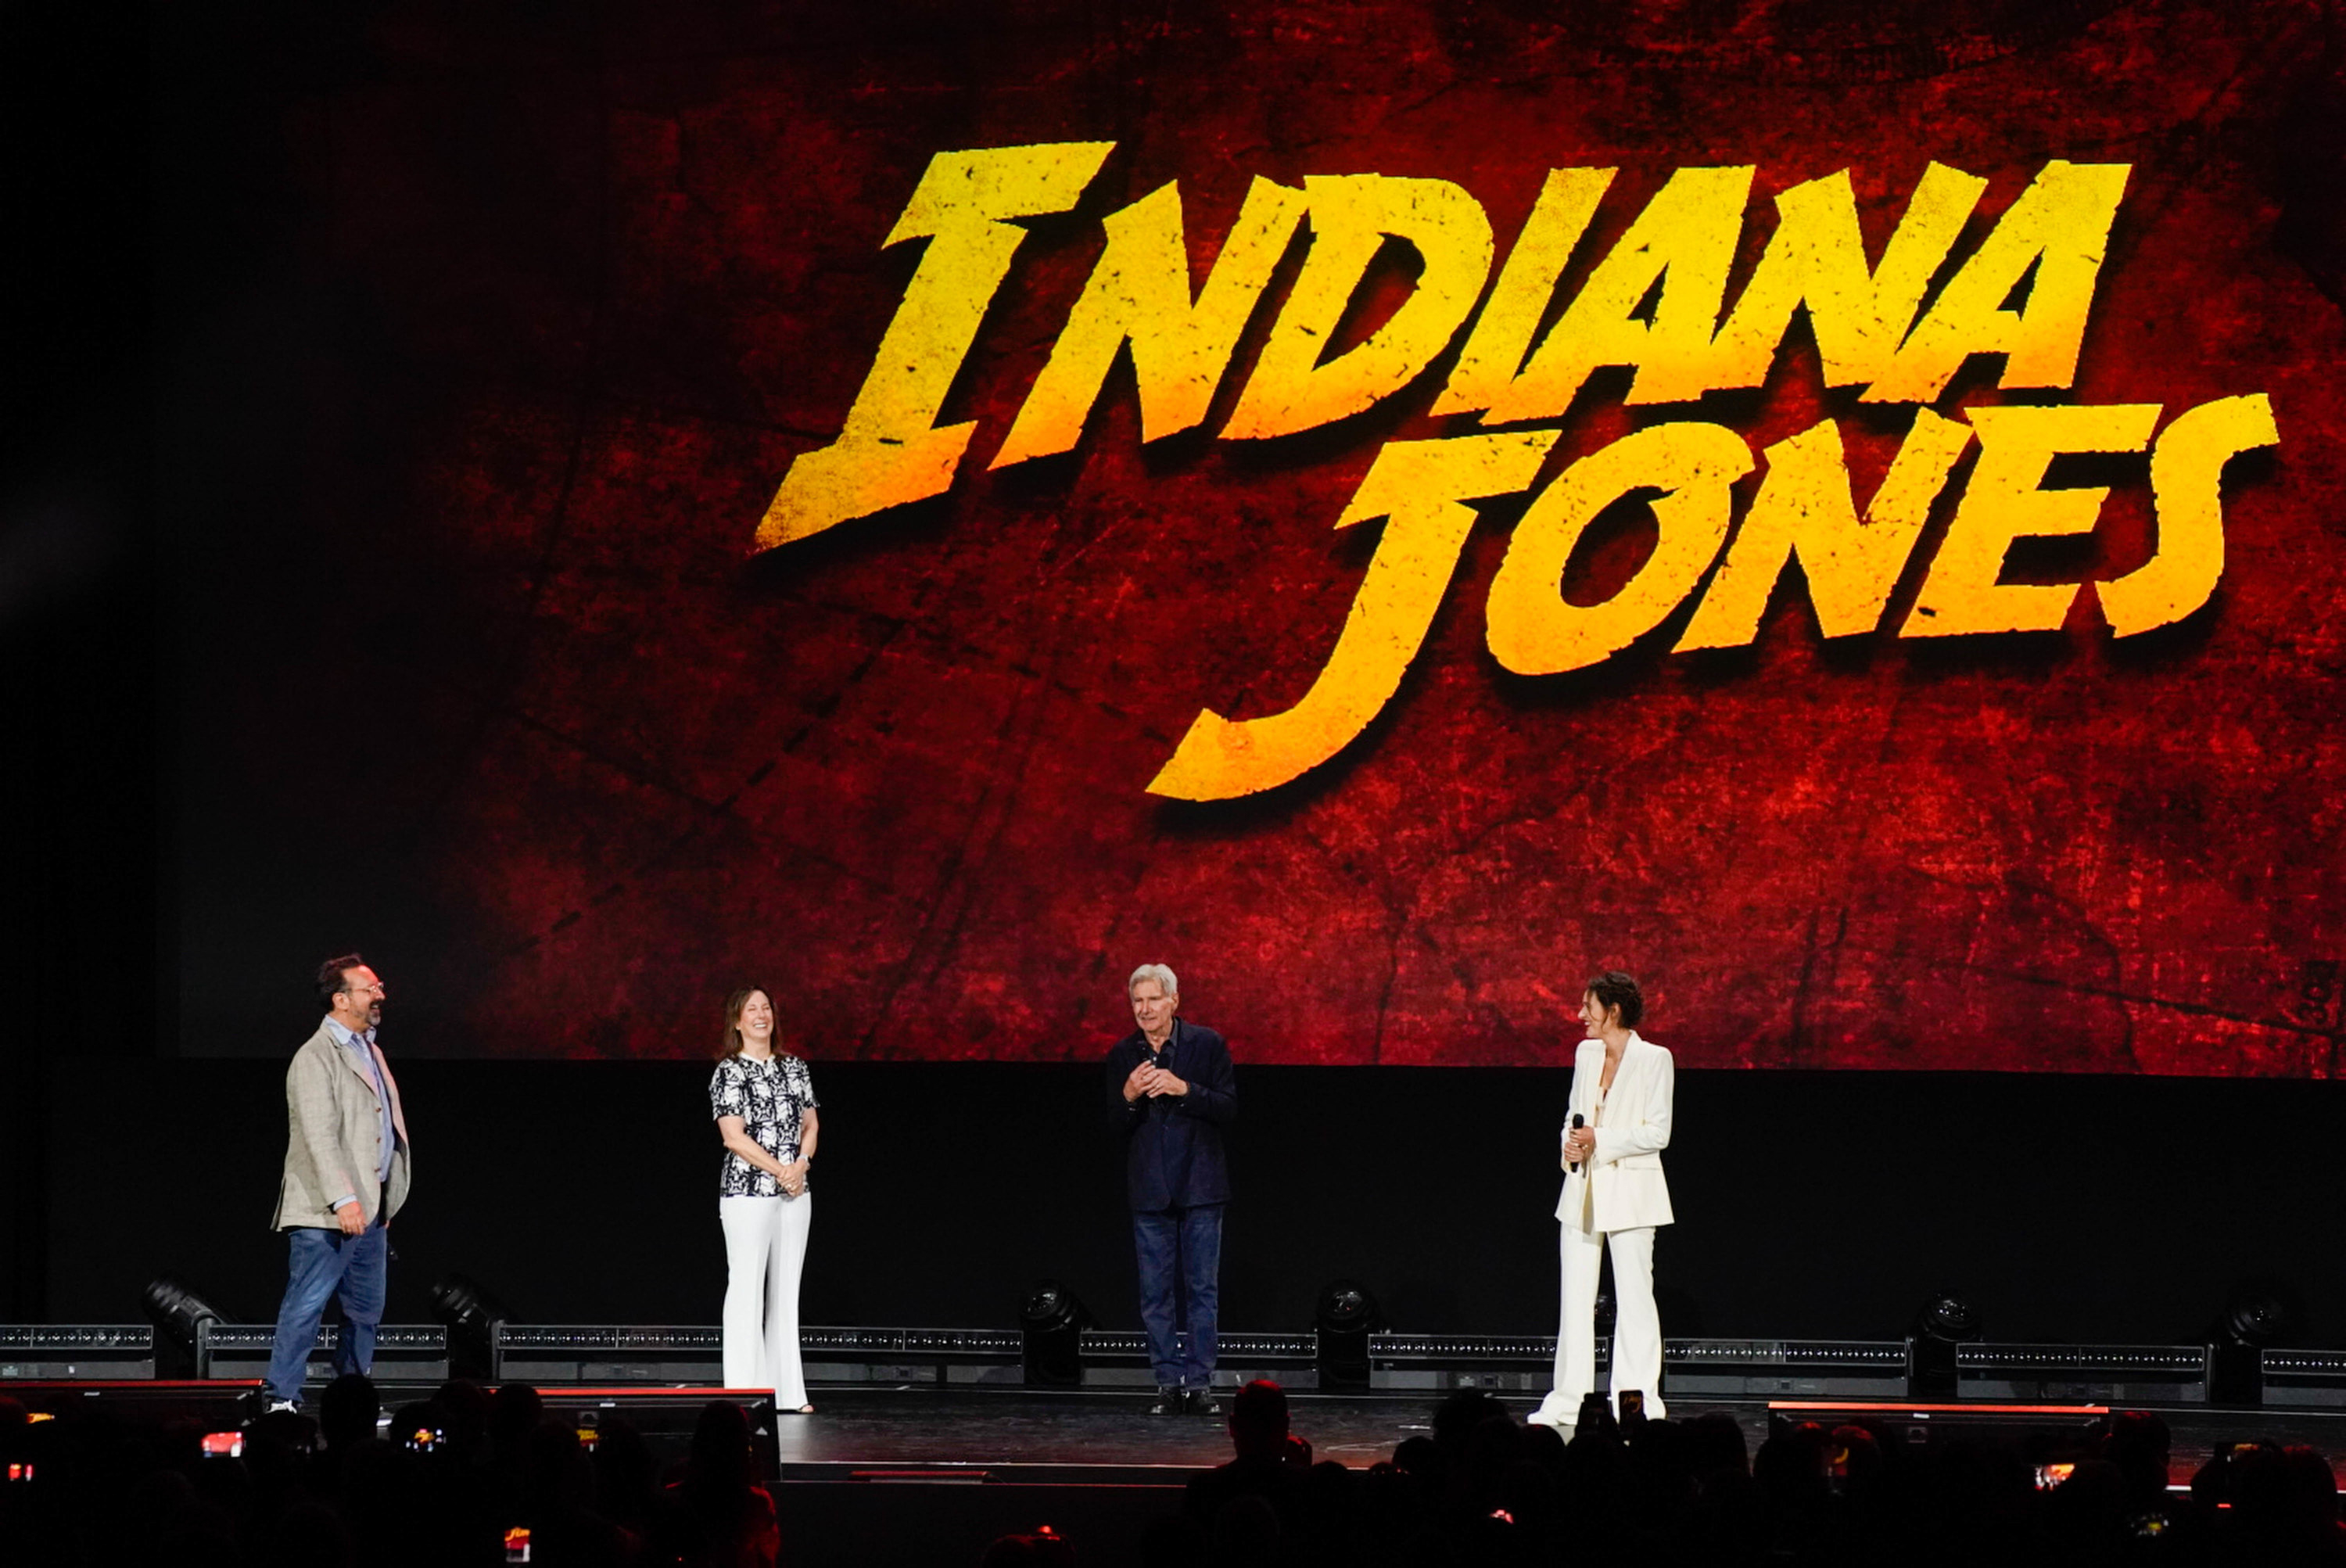 Harrison Ford talks about Indiana Jones onstage